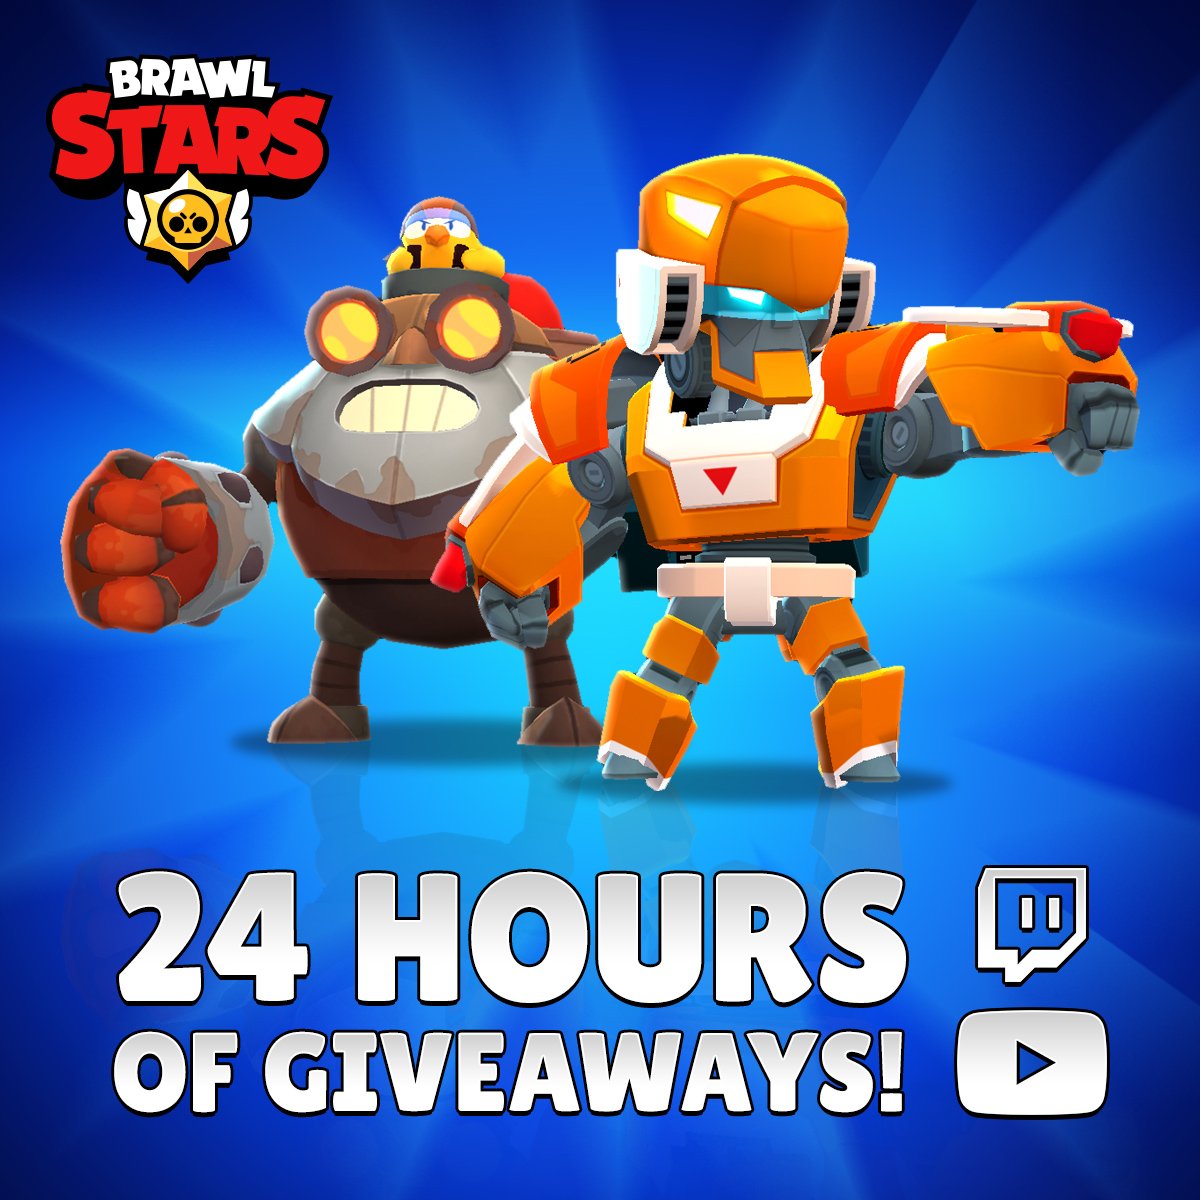 Brawl Stars Sur Twitter Retweet For A Chance To Winbrawlskins But If You Don T Get Lucky Don T Worry This Sunday July 14th More Than 30 Streamers Will Be Hosting Giveaways - pourquoi brawl star ne démarre plus